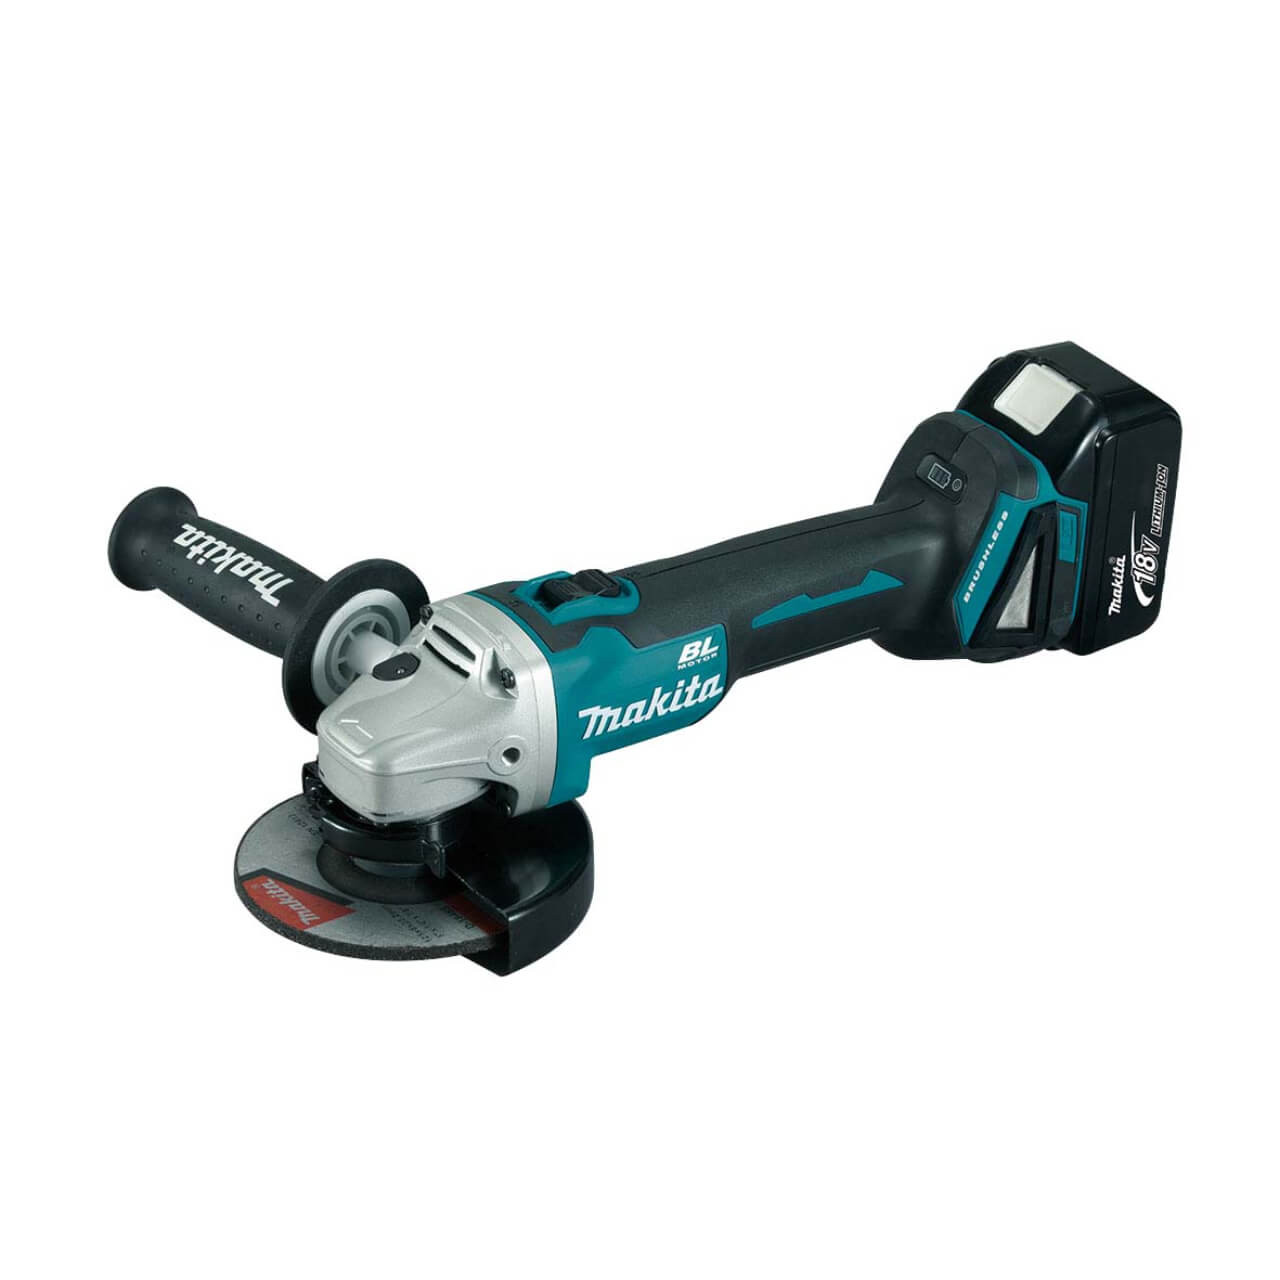 Makita 18V BRUSHLESS 125mm Slide Switch Angle Grinder Kit - Includes 2 x 5.0Ah Batteries. Rapid Charger & Carry Case